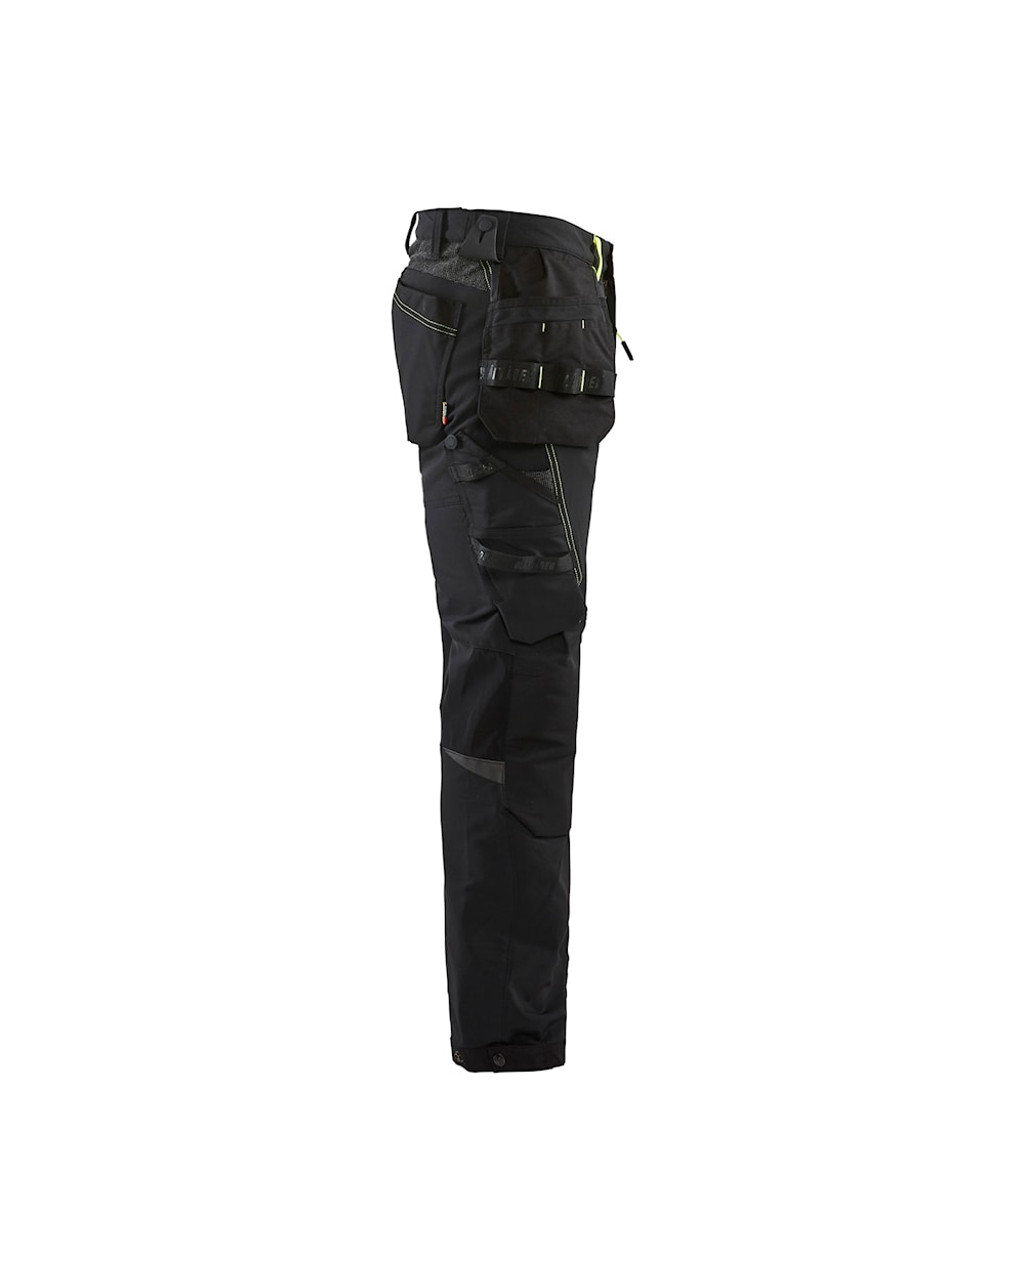 Craftsman Hardware supplies Mens Black Trousers with Holster Pockets for the Automotive Industry and Electricians in Glen Waverley, Bayswater and Mitcham